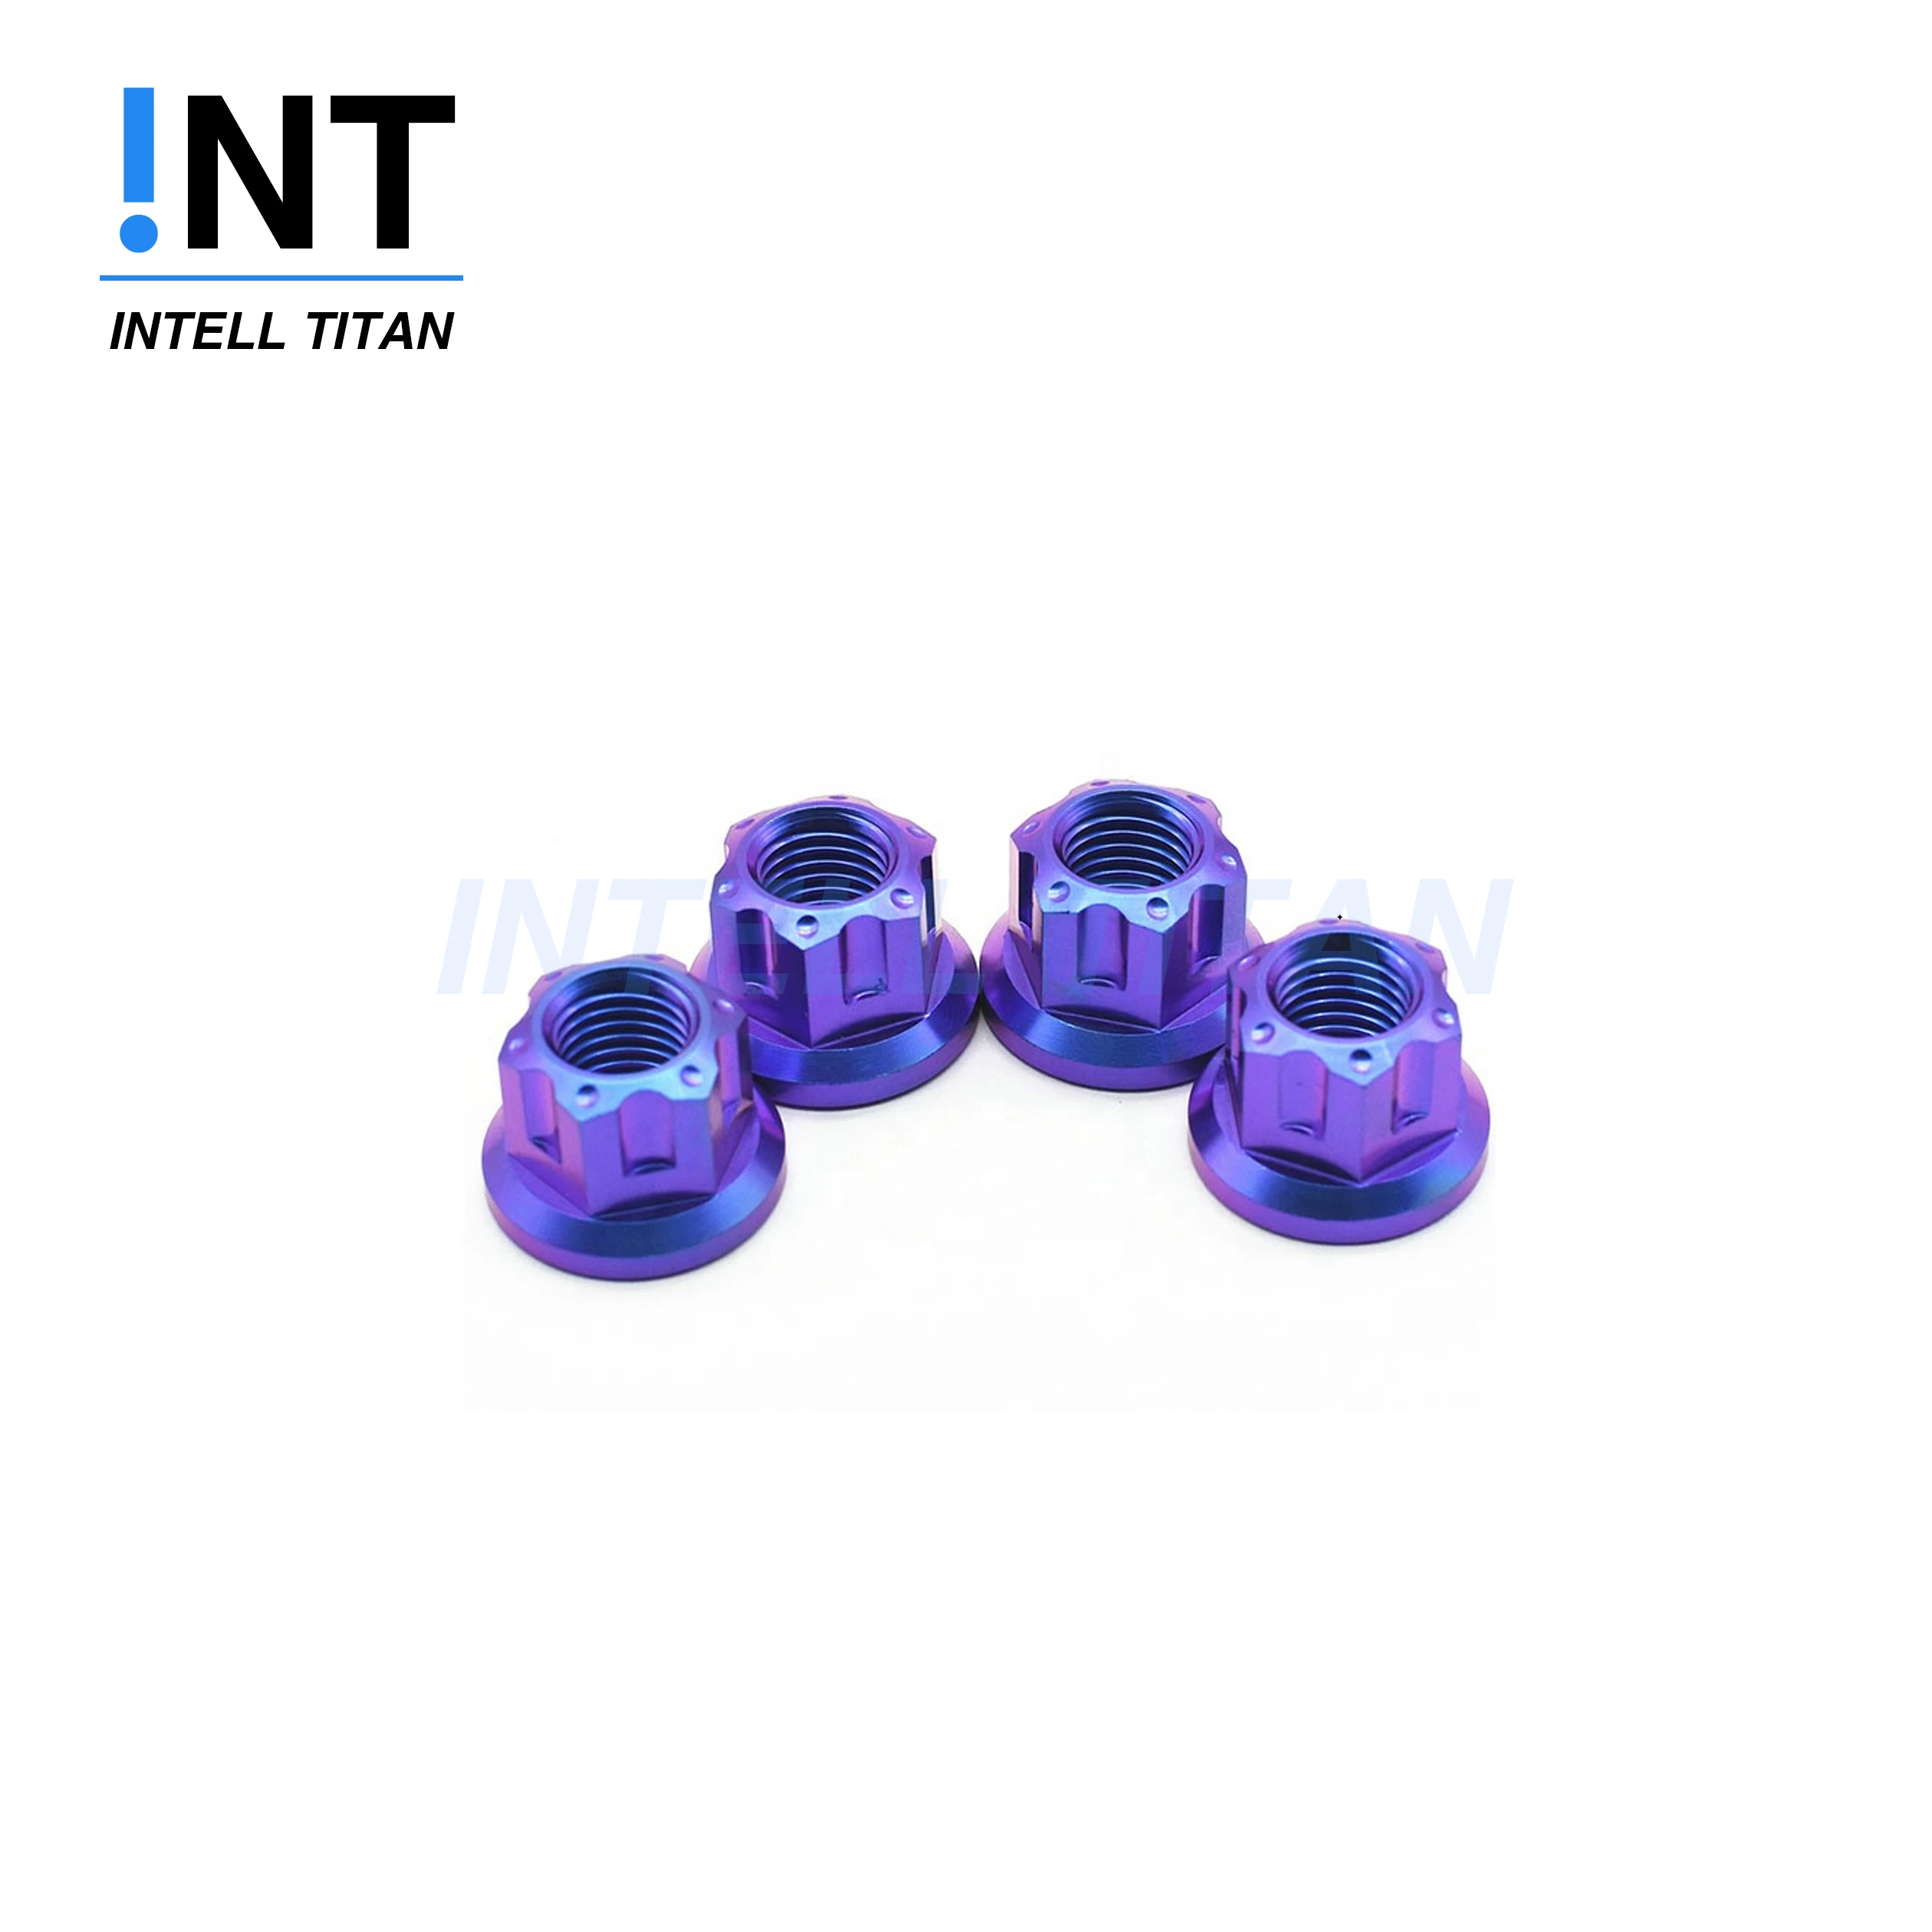 

Titanium Gr5 flange nut Ti Axle nuts for Motorcycle modified, Sliver,yellow,blue,gold,rainbow,purple,green,black